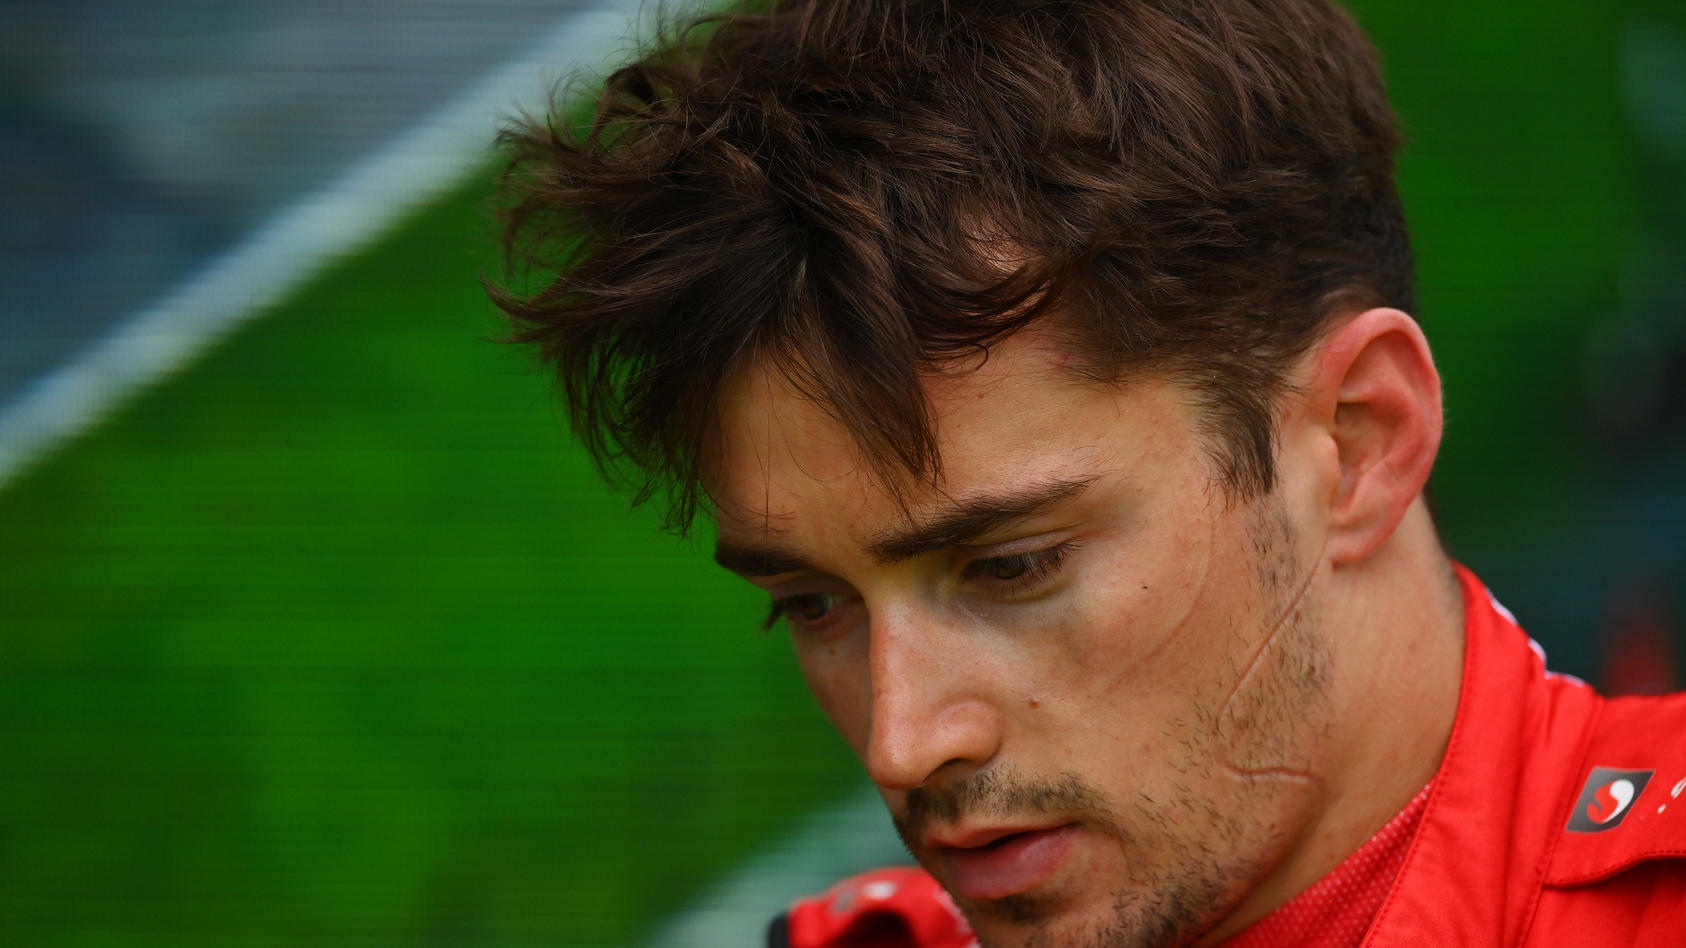 IMOLA, ITALY - APRIL 24: 6th placed Charles Leclerc of Monaco and Ferrari looks dejected in parc ferme after spinning out from third position with 10 laps remaining during the F1 Grand Prix of Emilia Romagna at Autodromo Enzo e Dino Ferrari on April 